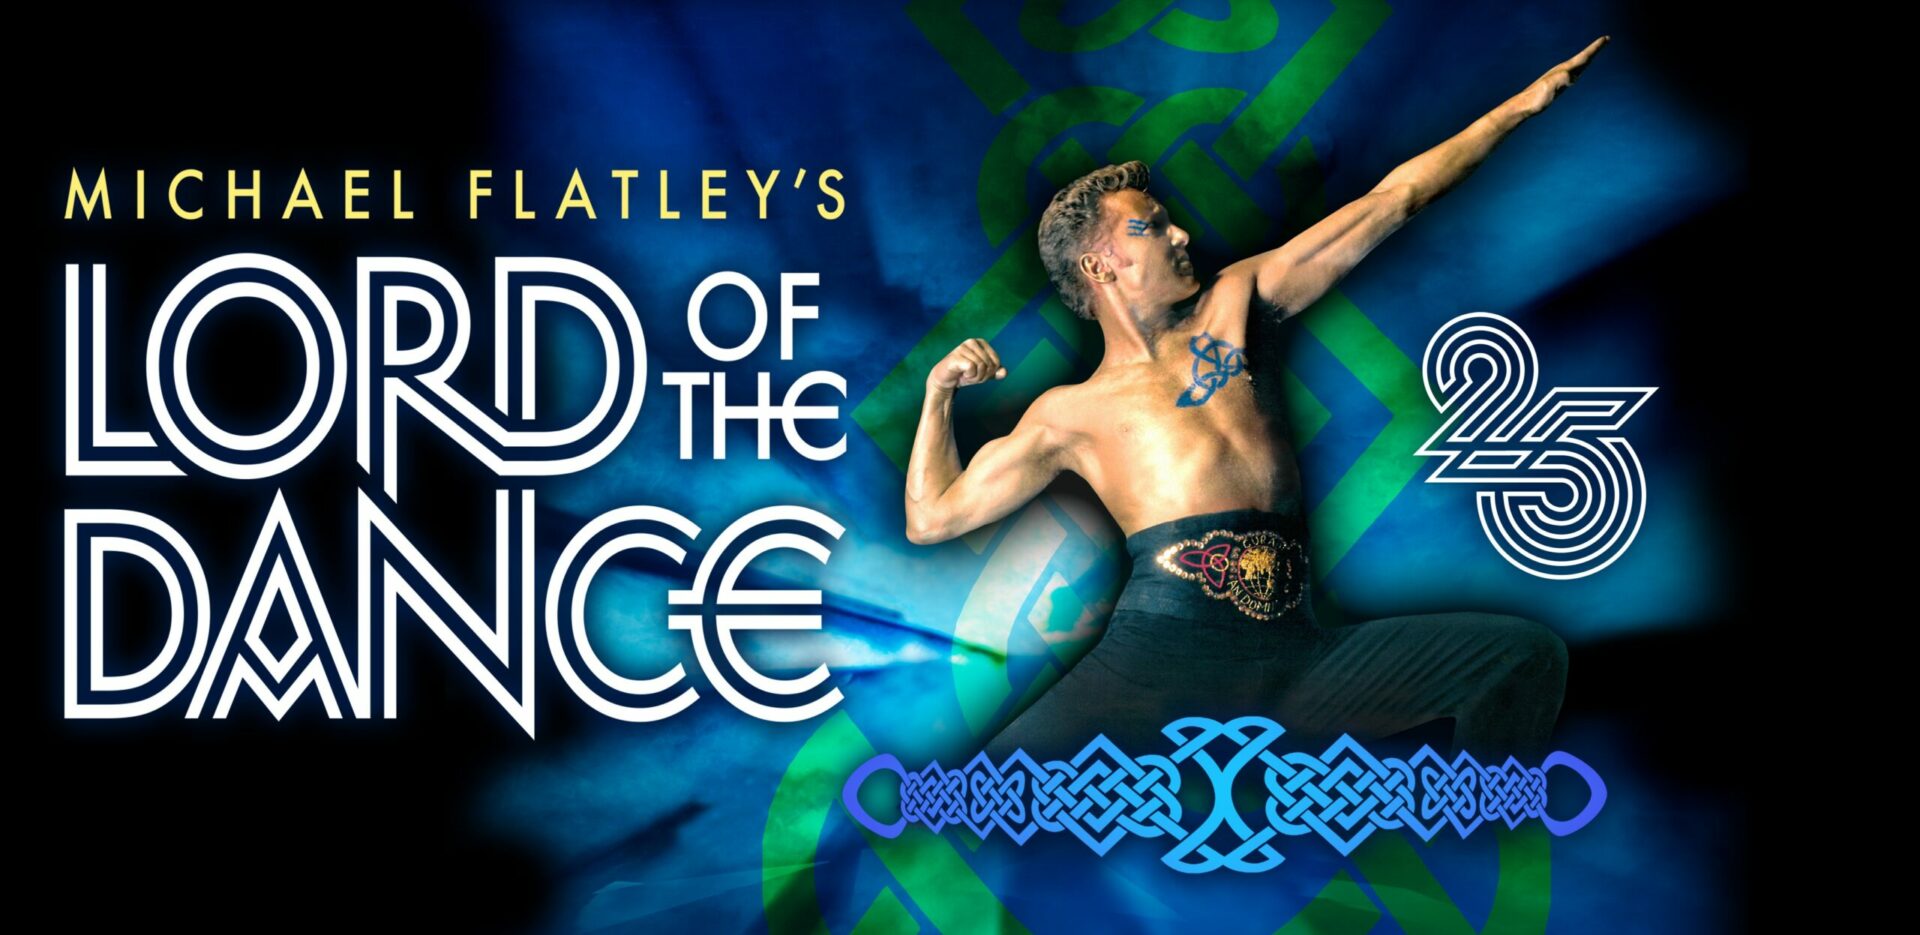 Lord of the Dance: 25 years of Standing Ovations